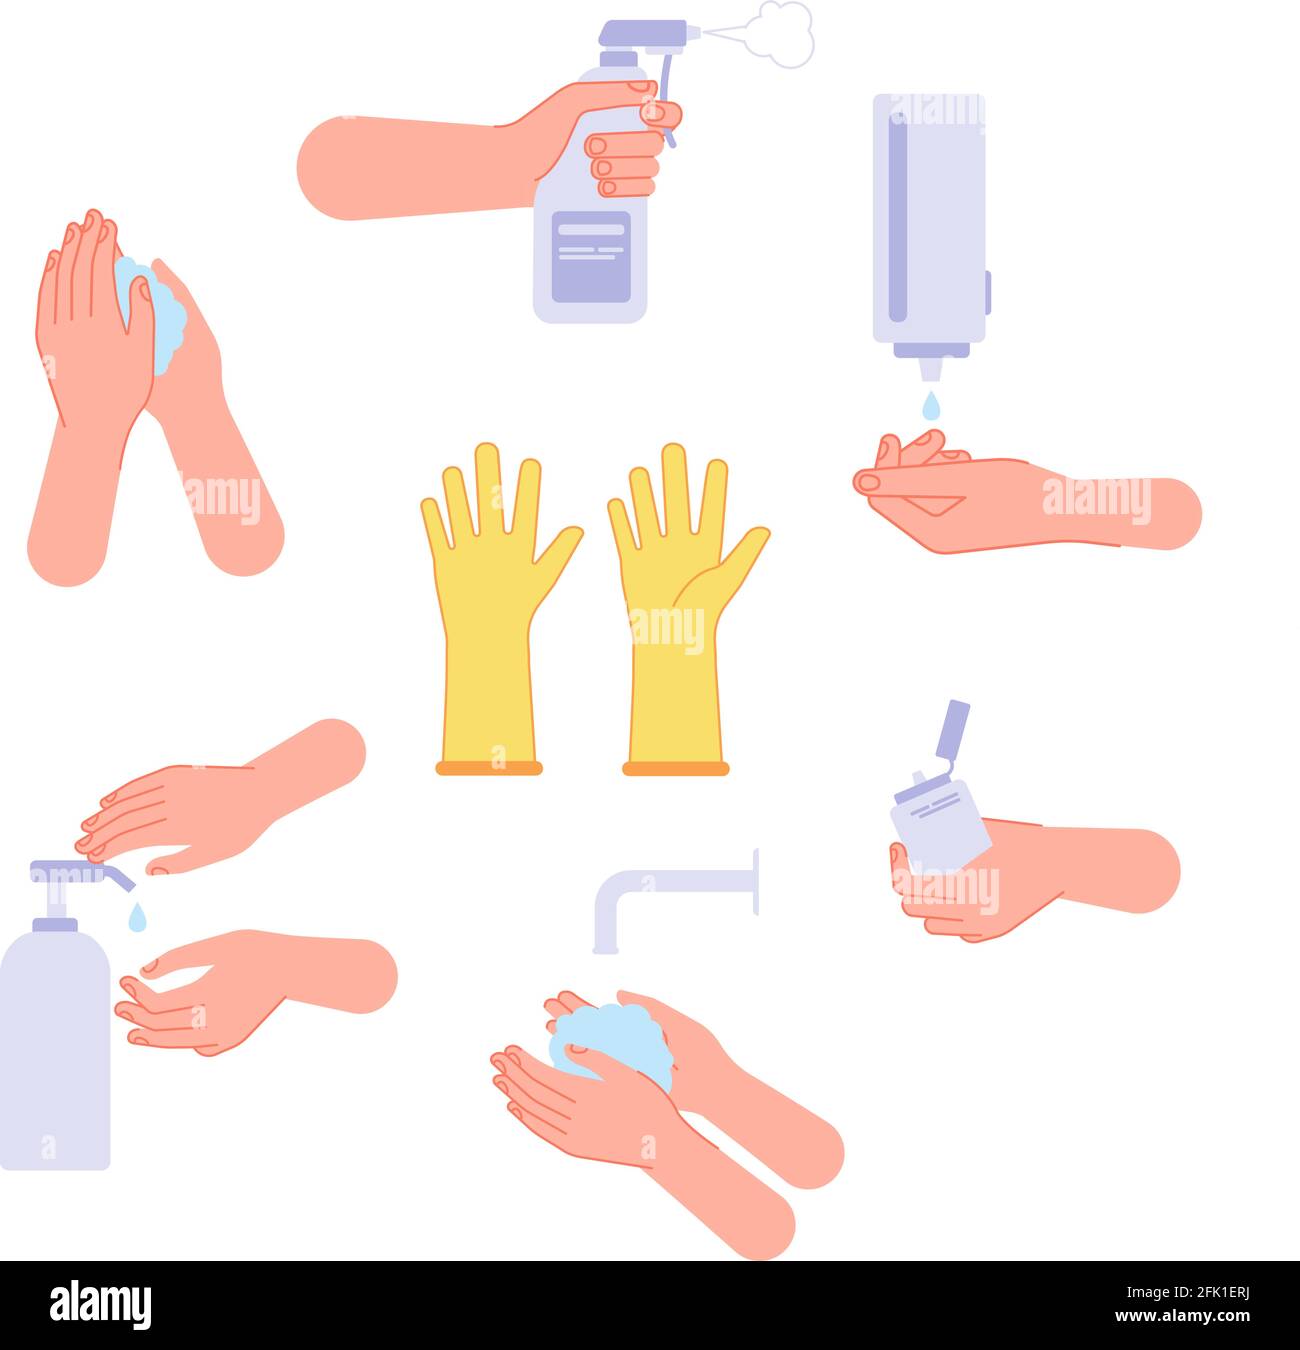 Disinfection. Hand wash steps, drying hands and hygiene. Sanitation spray washing soap gel and sanitize bottle. Virus protection vector set Stock Vector